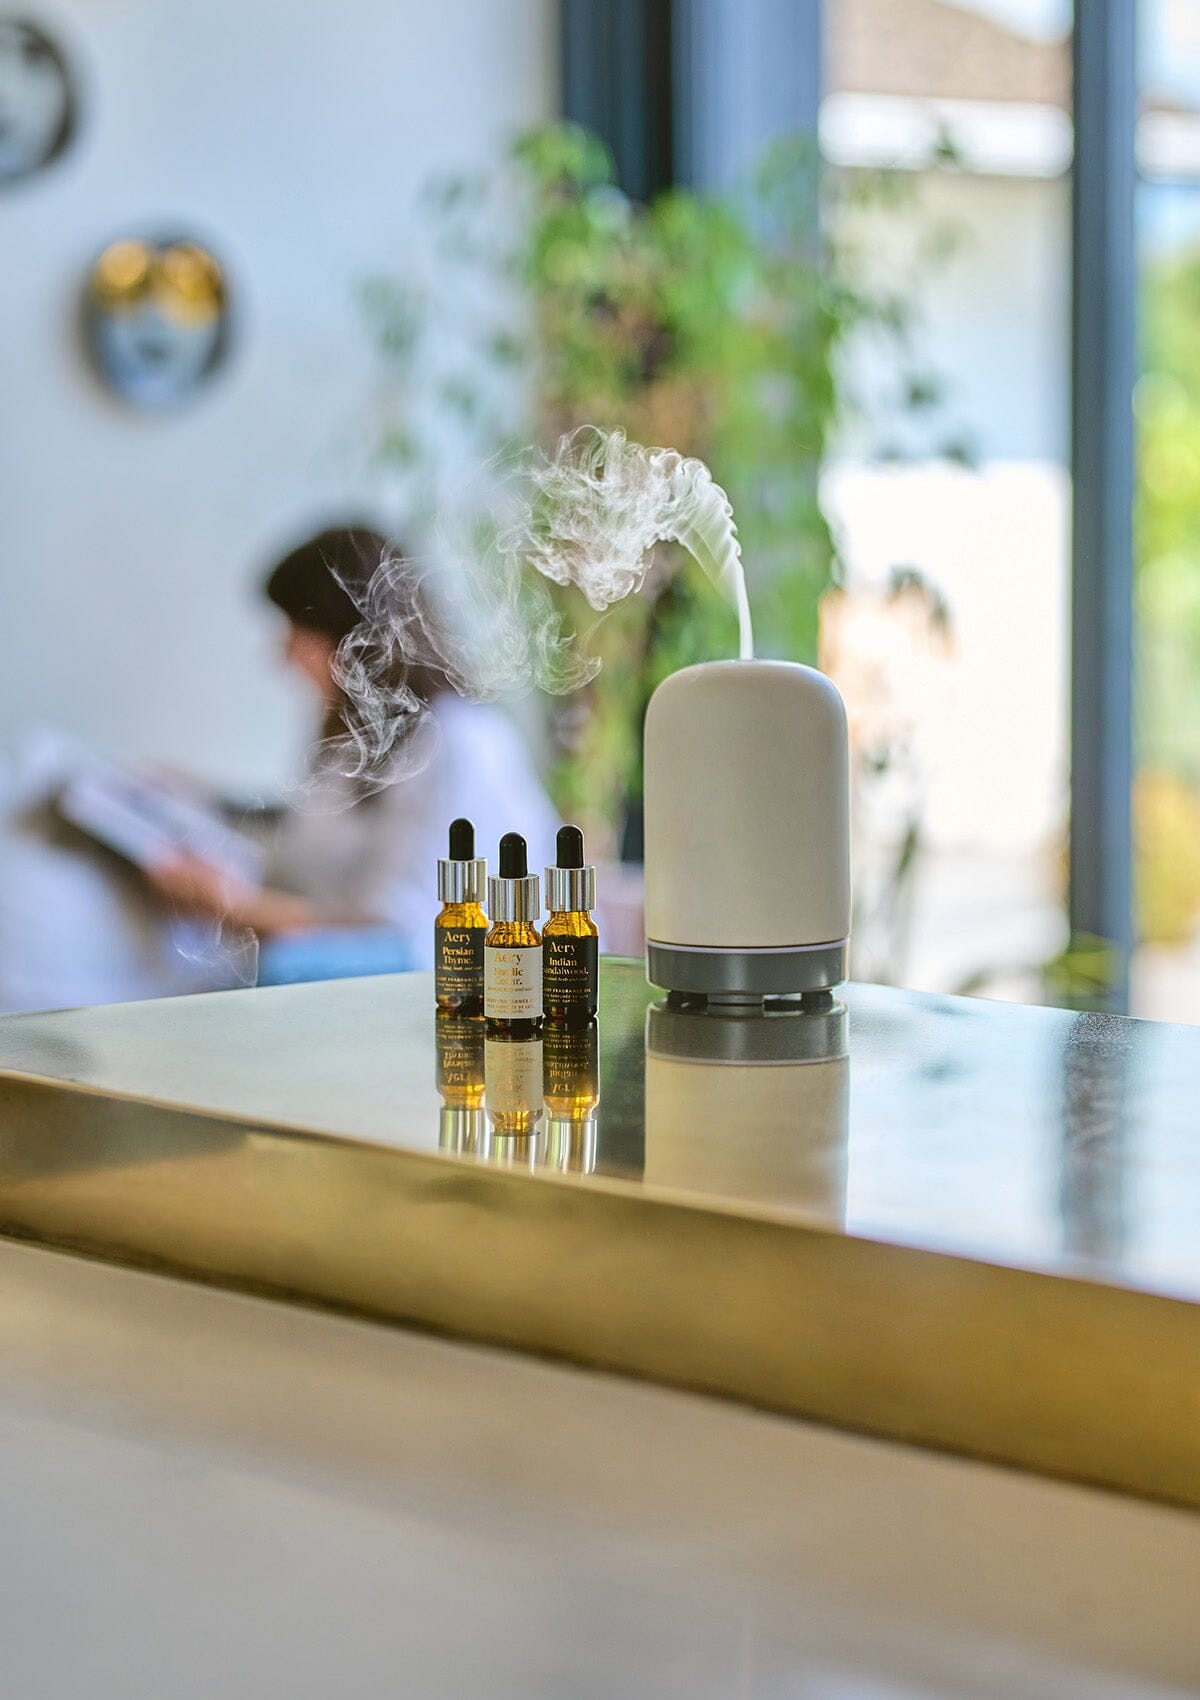 Black Indian Sandalwood fragrance oil by Aery displayed next to Persian Thyme and Nordic Cedarleaf fragrance oils and electric diffuser placed on gold kitchen work top 